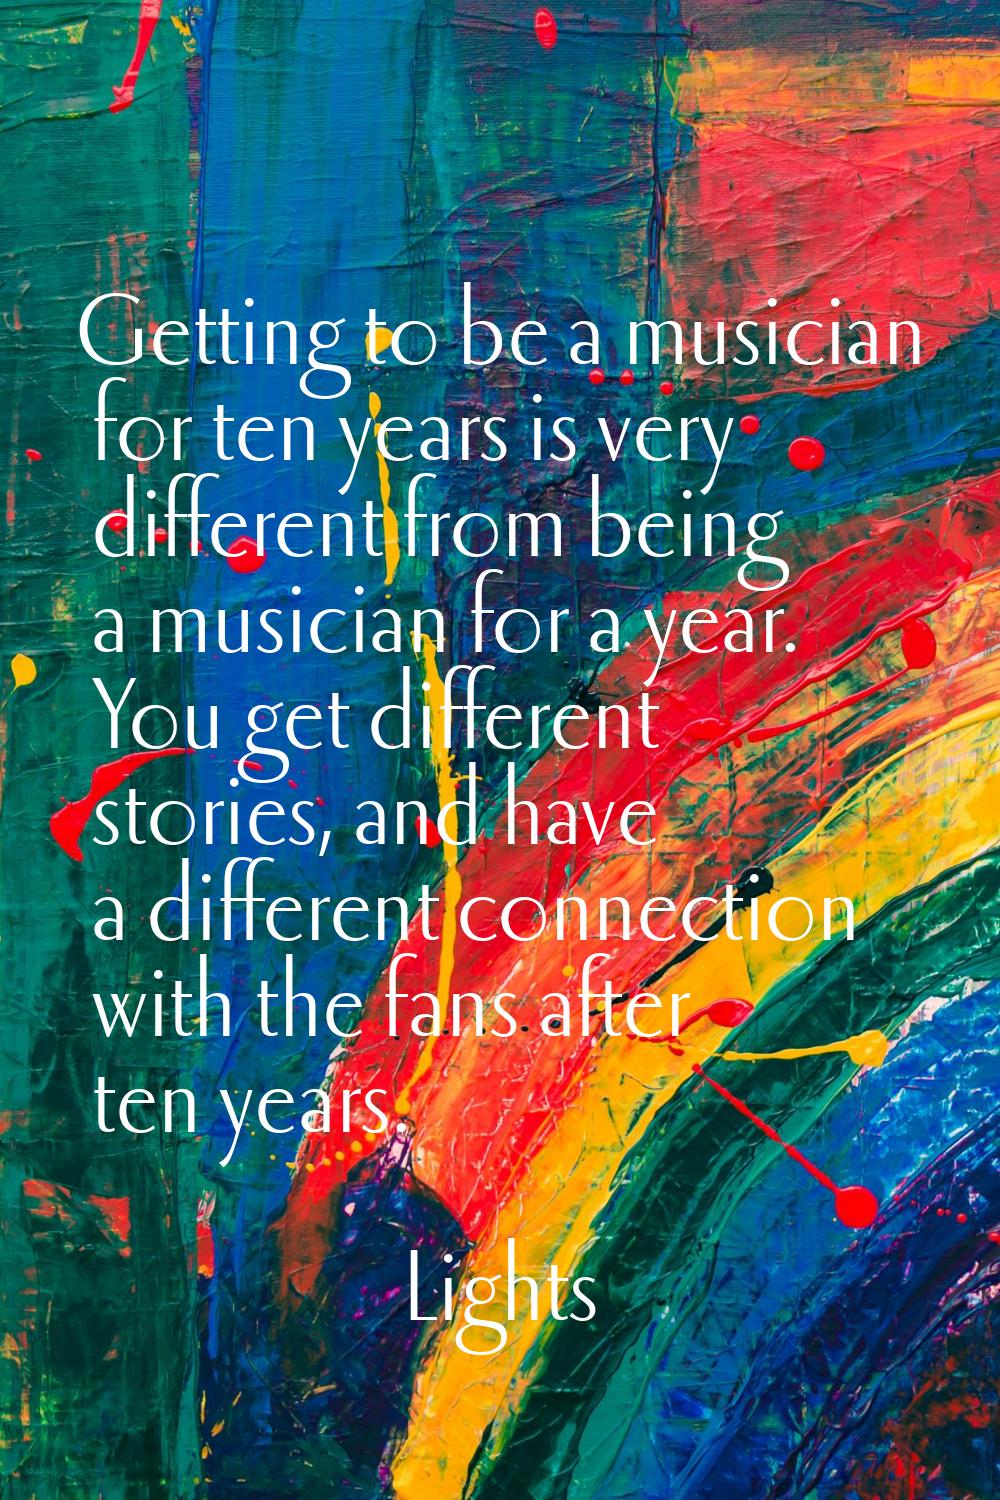 Getting to be a musician for ten years is very different from being a musician for a year. You get 